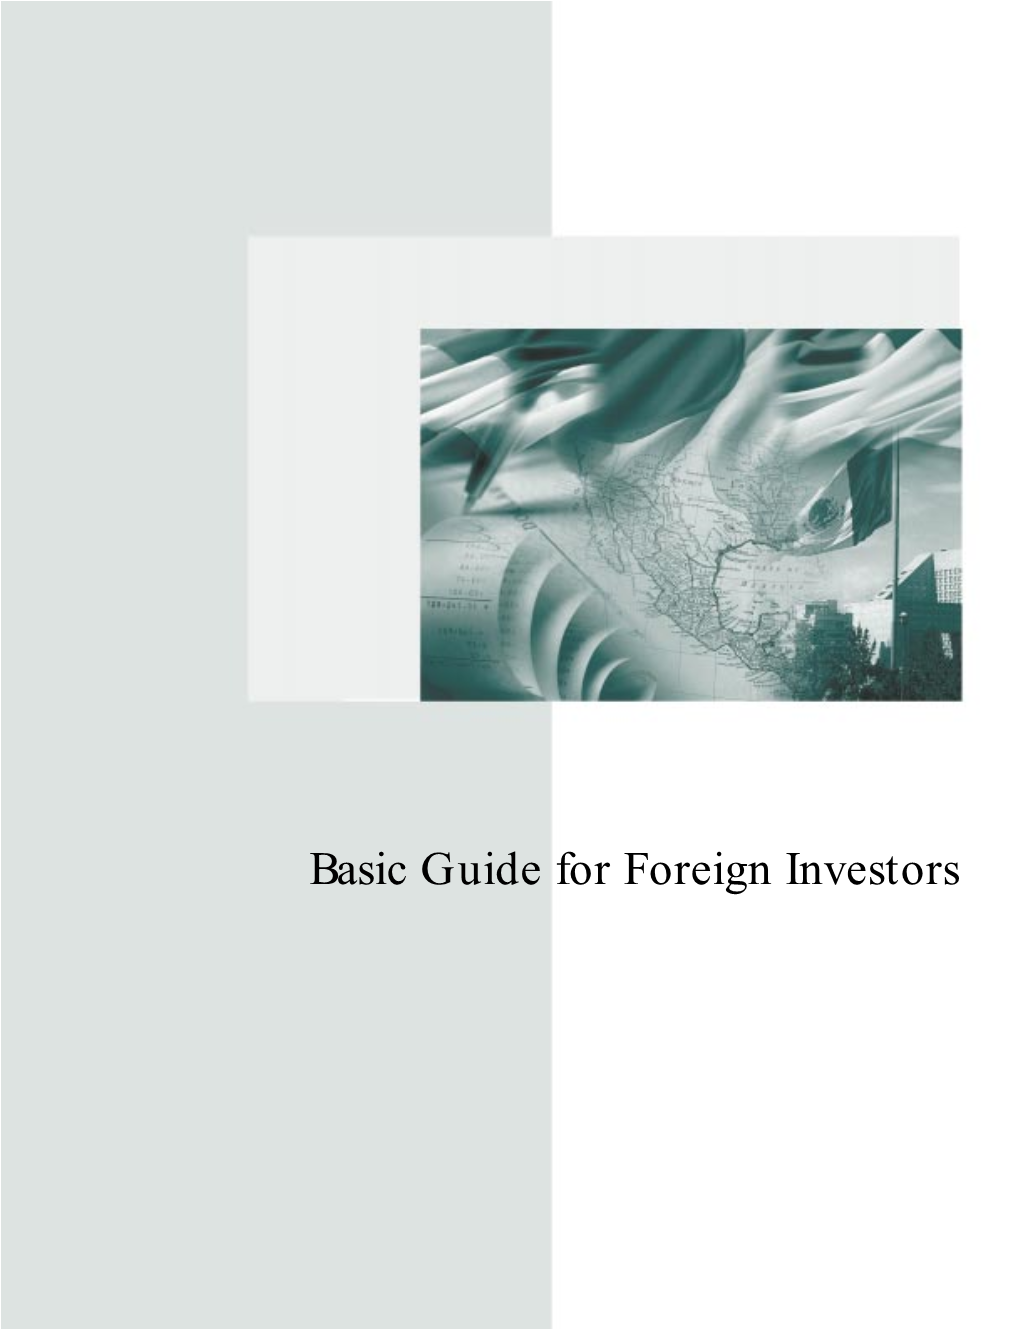 Basic Guide for Foreign Investors